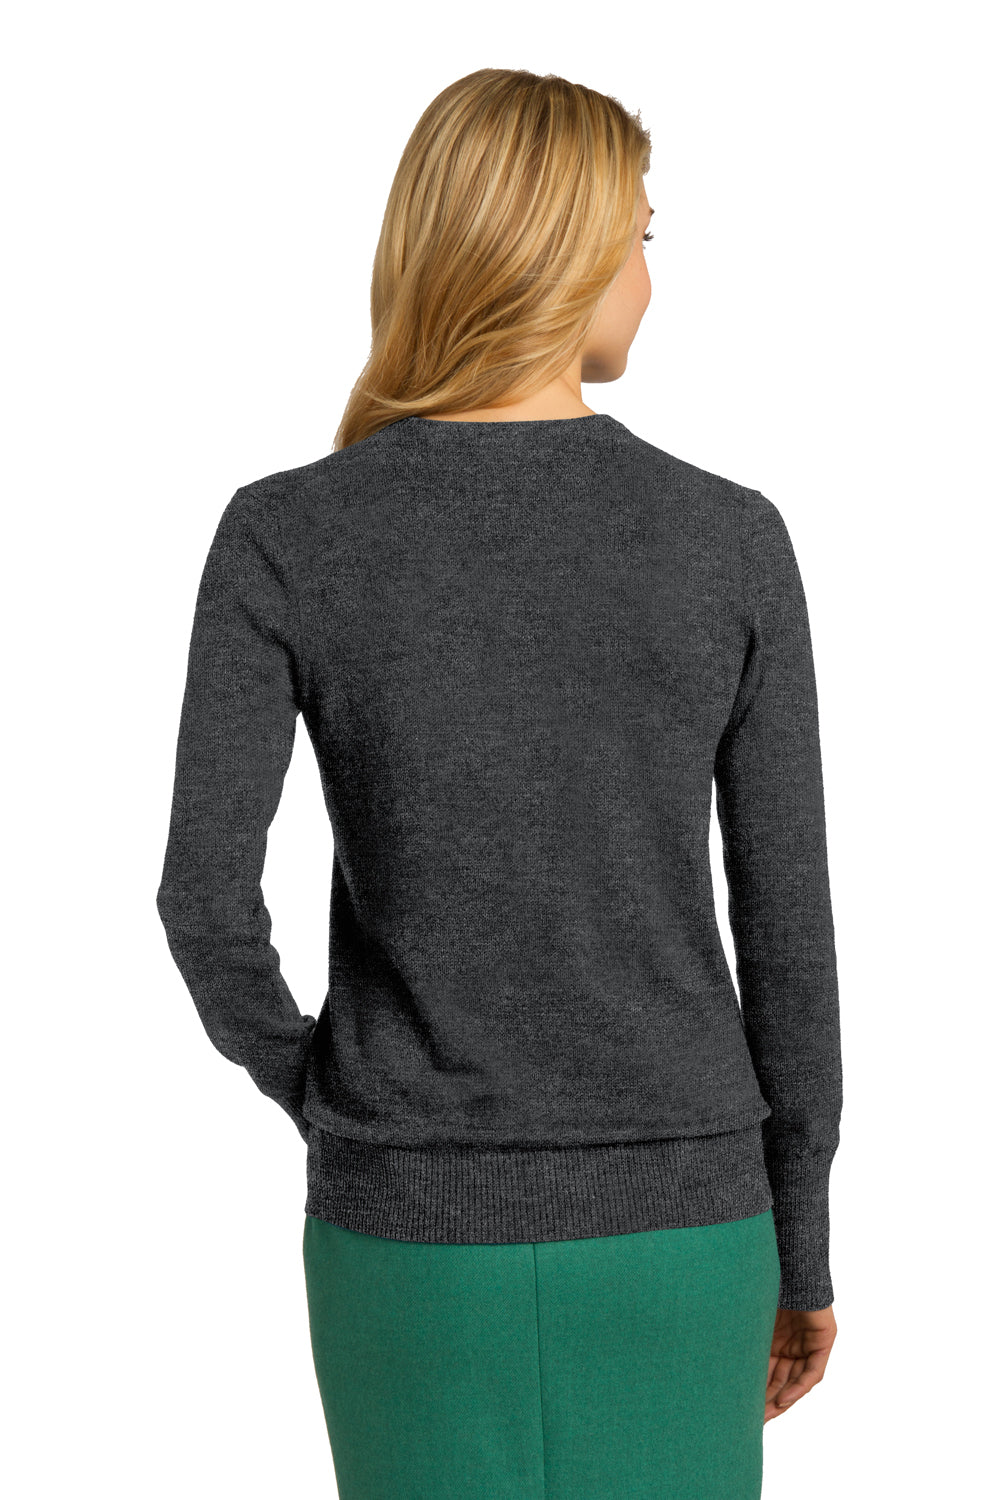 Port Authority LSW285 Womens Long Sleeve V-Neck Sweater Heather Charcoal Grey Back